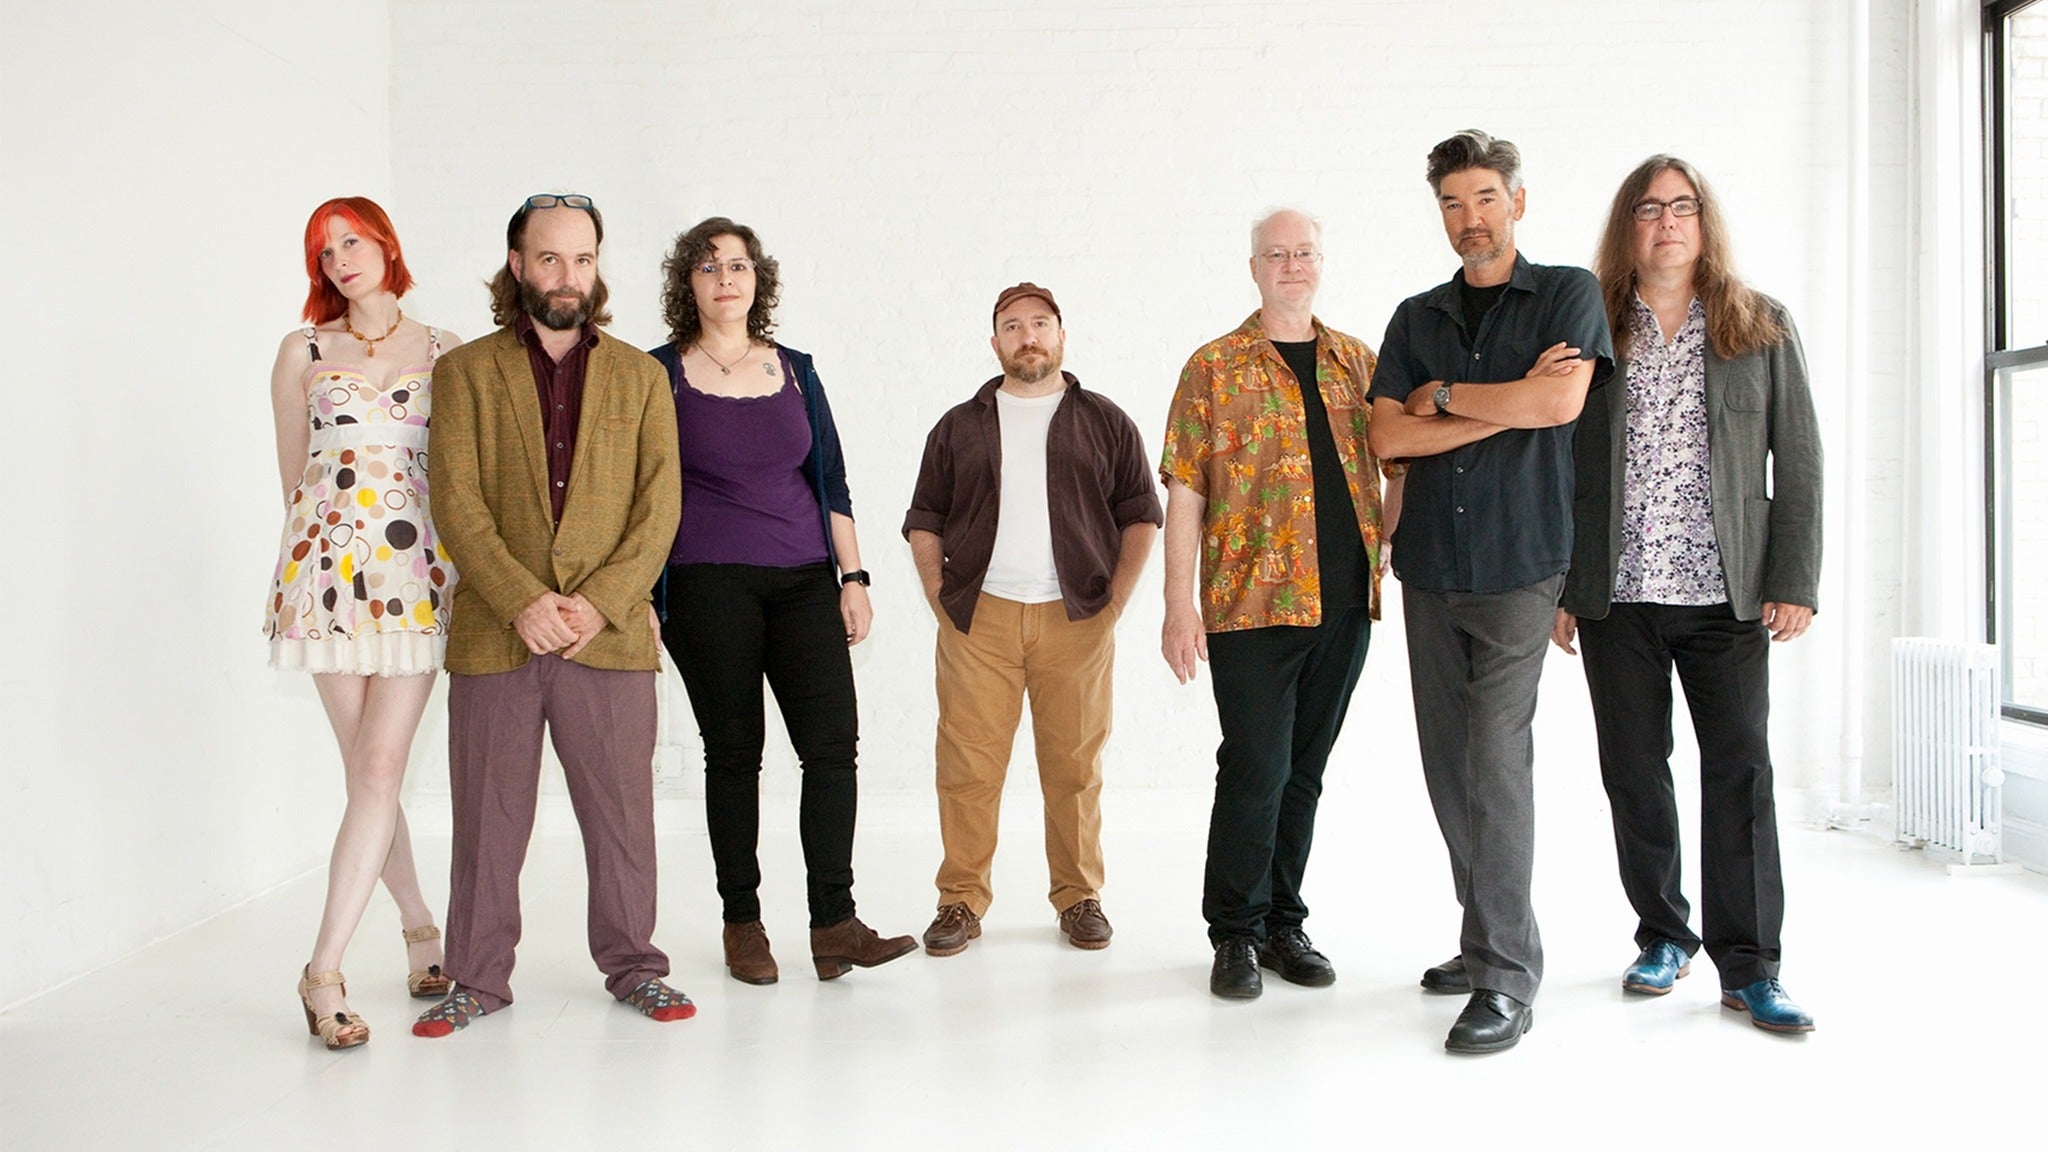 Image used with permission from Ticketmaster | The Magnetic Fields tickets